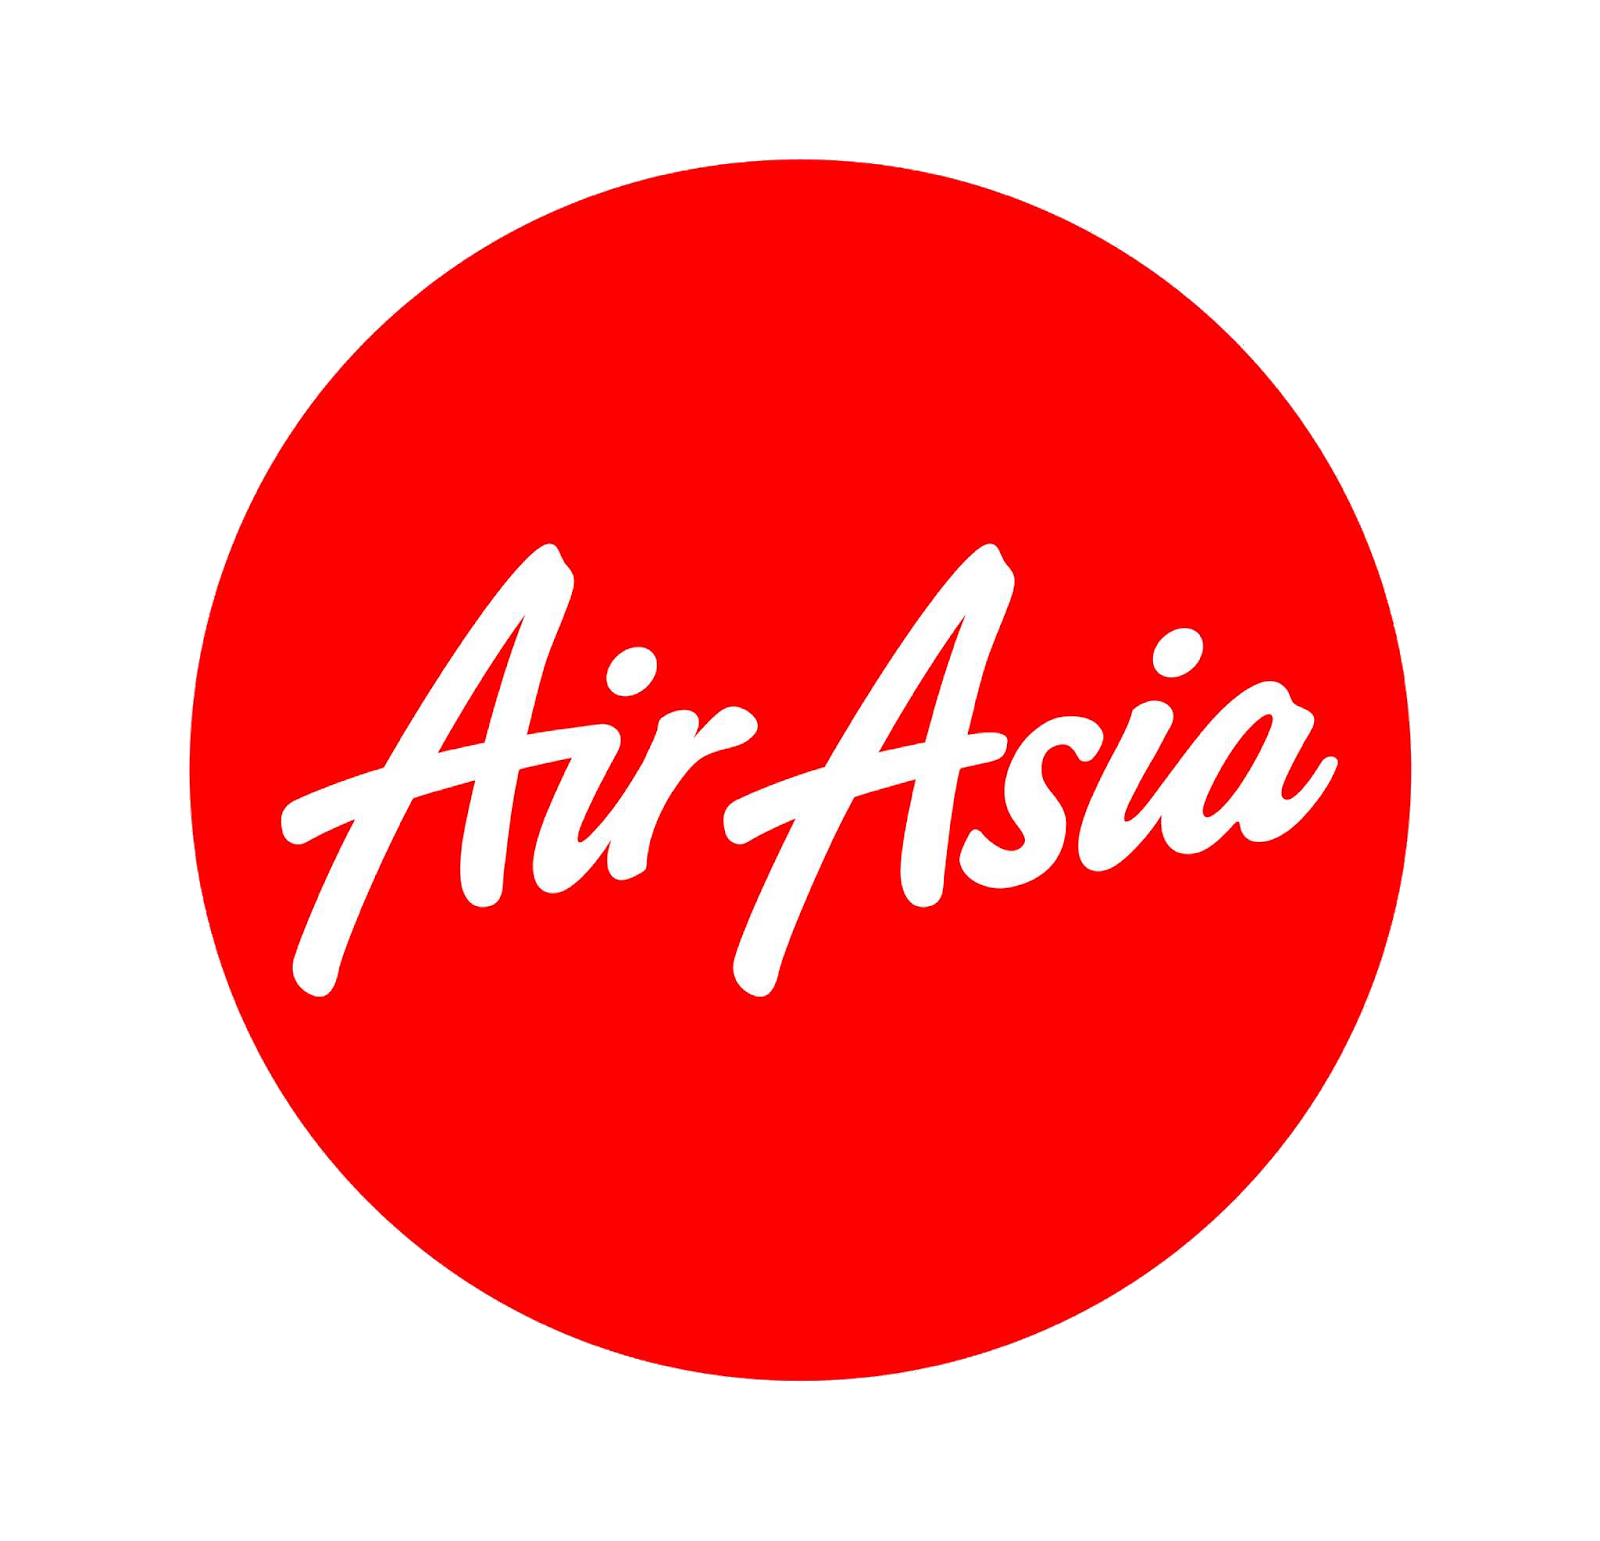 With visa-free entry for Indians, AirAsia adds 1.5mn seats between India & Malaysia